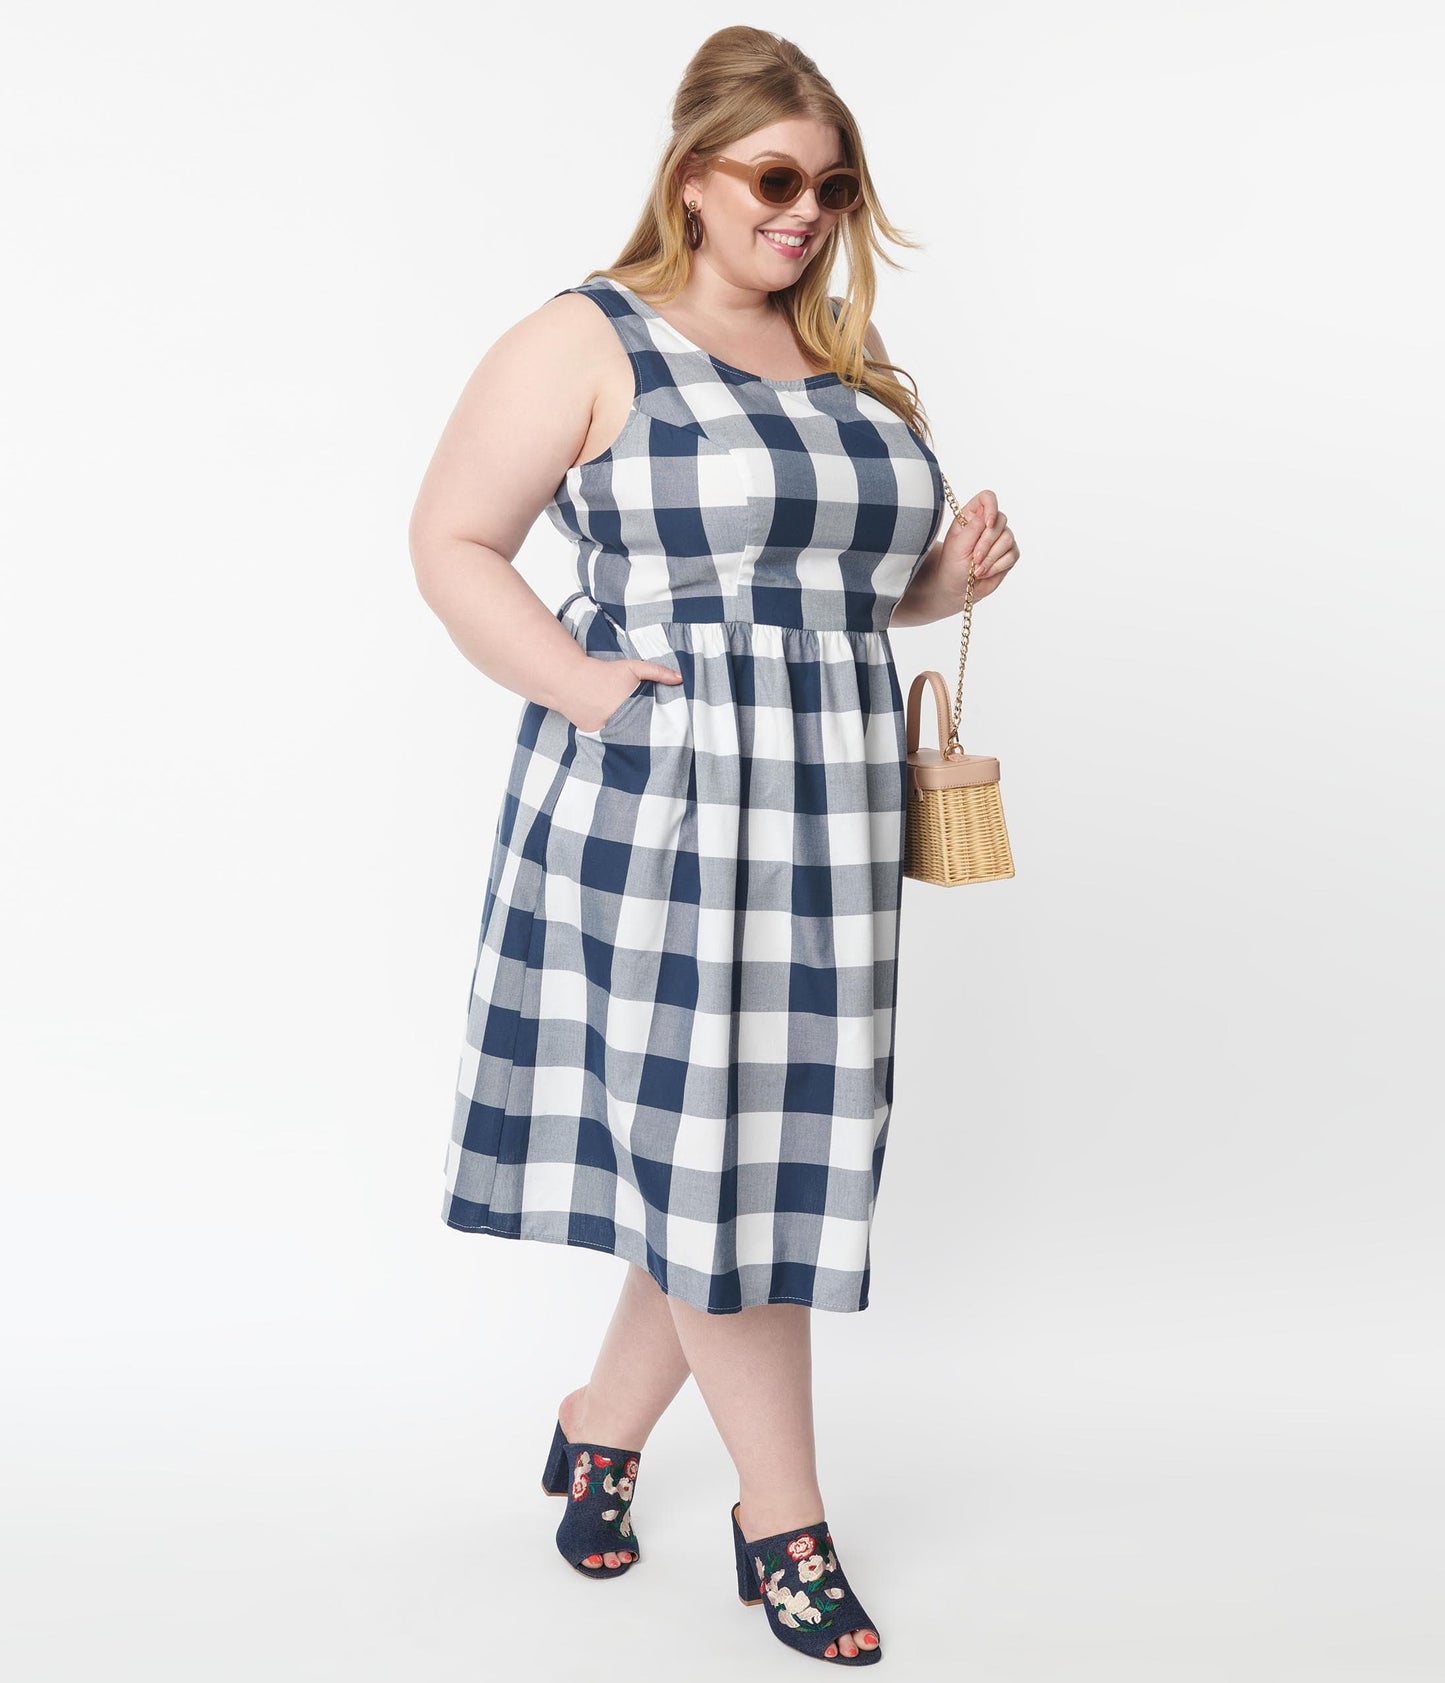 Retrolicious Plus Size 1950s Navy & White Gingham Fit & Flare Dress